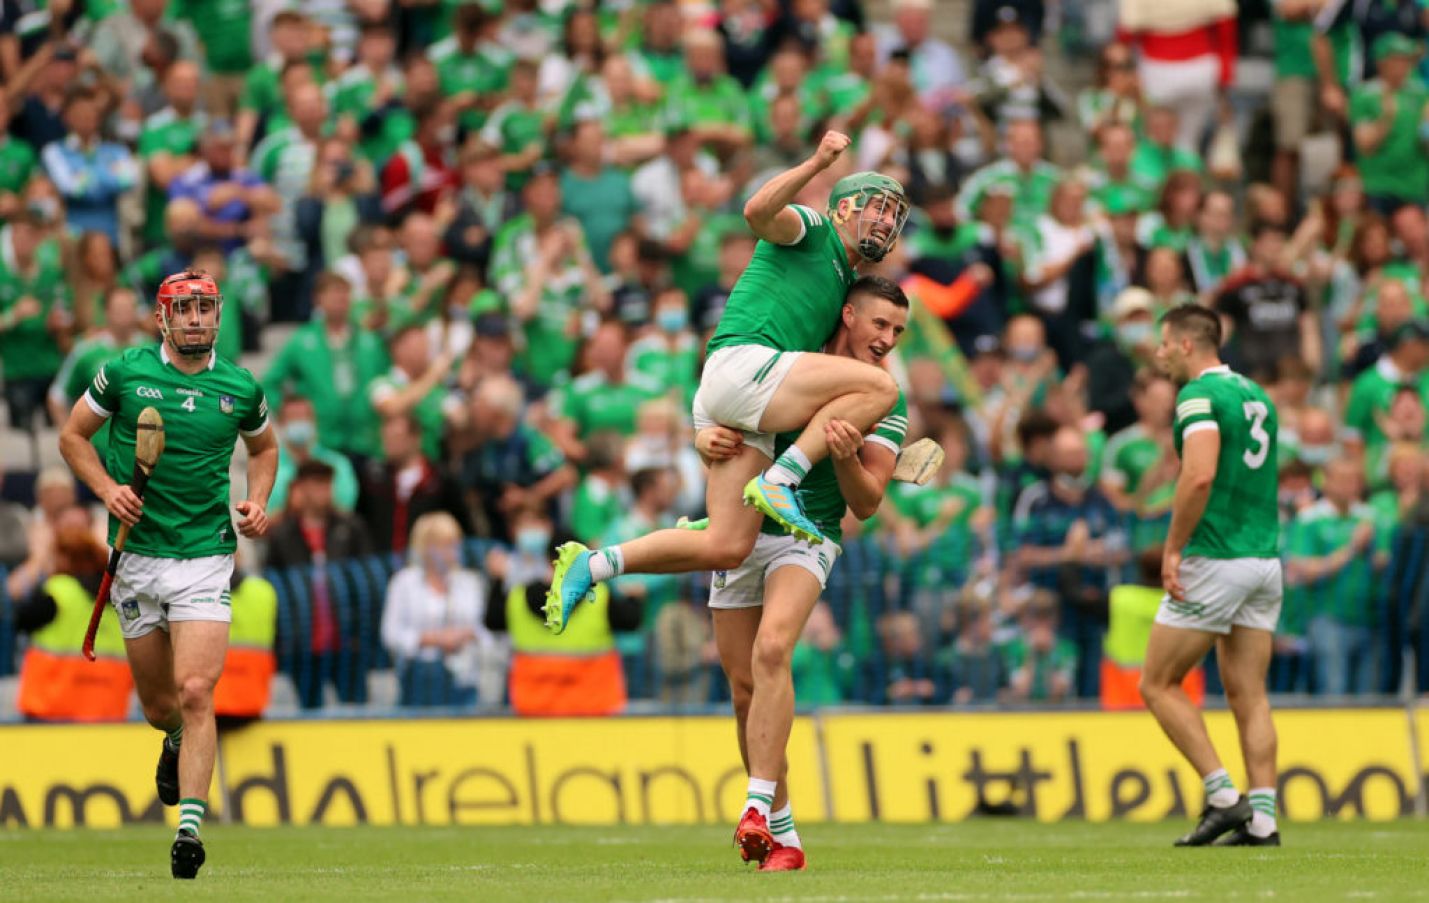 Limerick's Sean Finn And Gearoid Hegarty Celebrate At The Final Whistle All-Ireland Senior Hurling Championship Final. ©Inpho/James Crombie